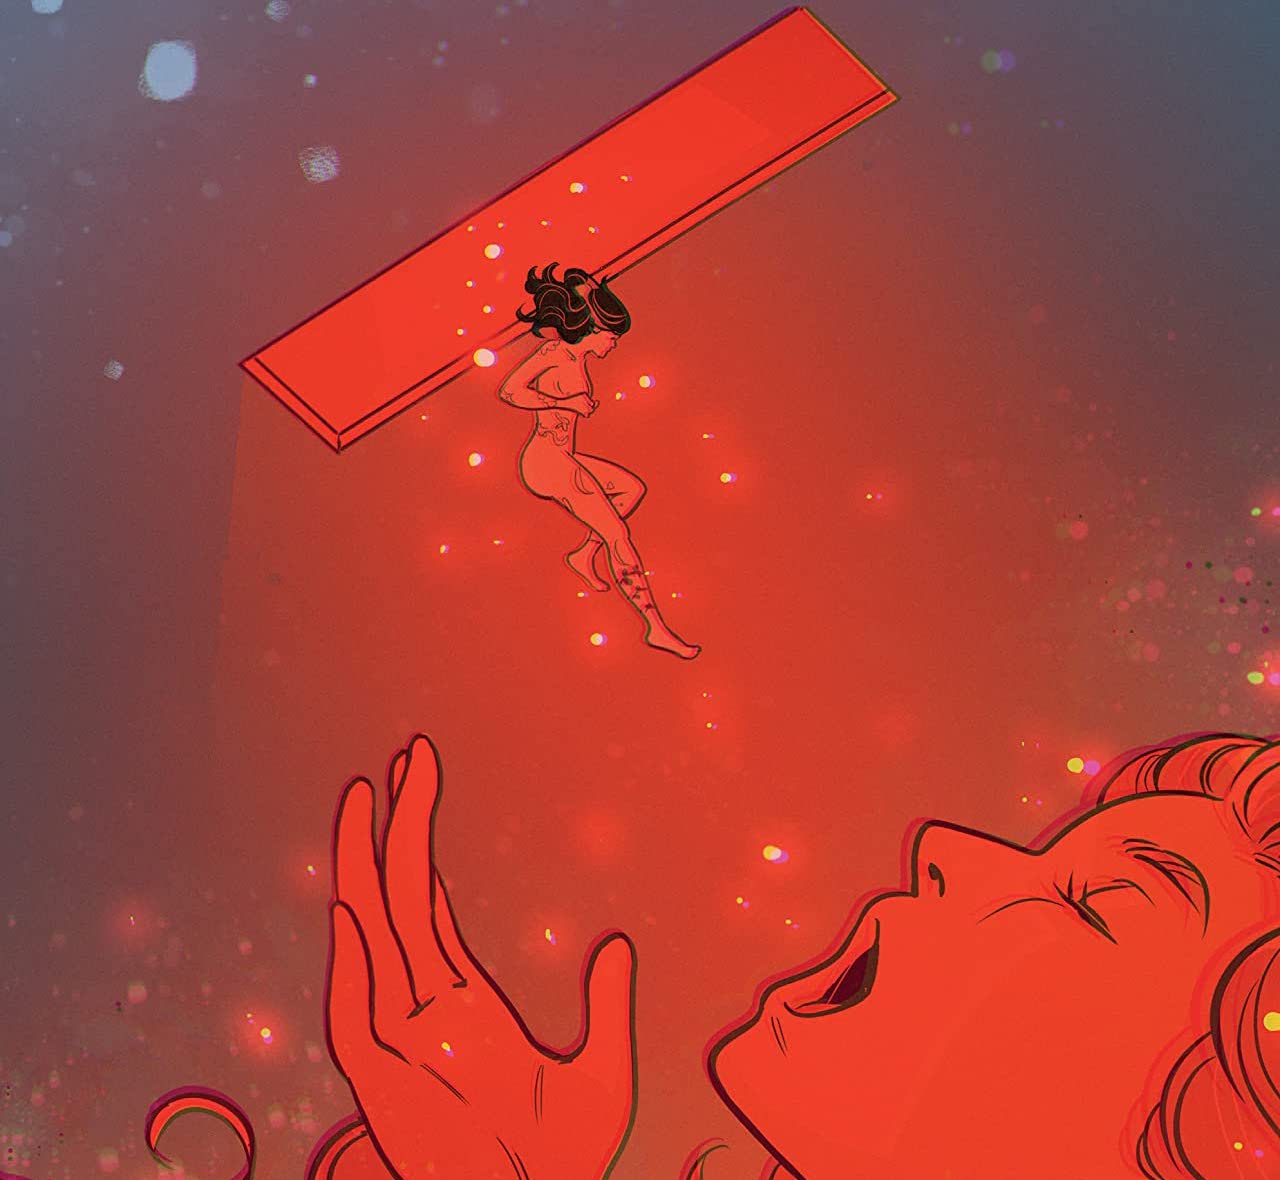 'Bolero' #1 takes its time to unveil its character and its big sci-fi premise